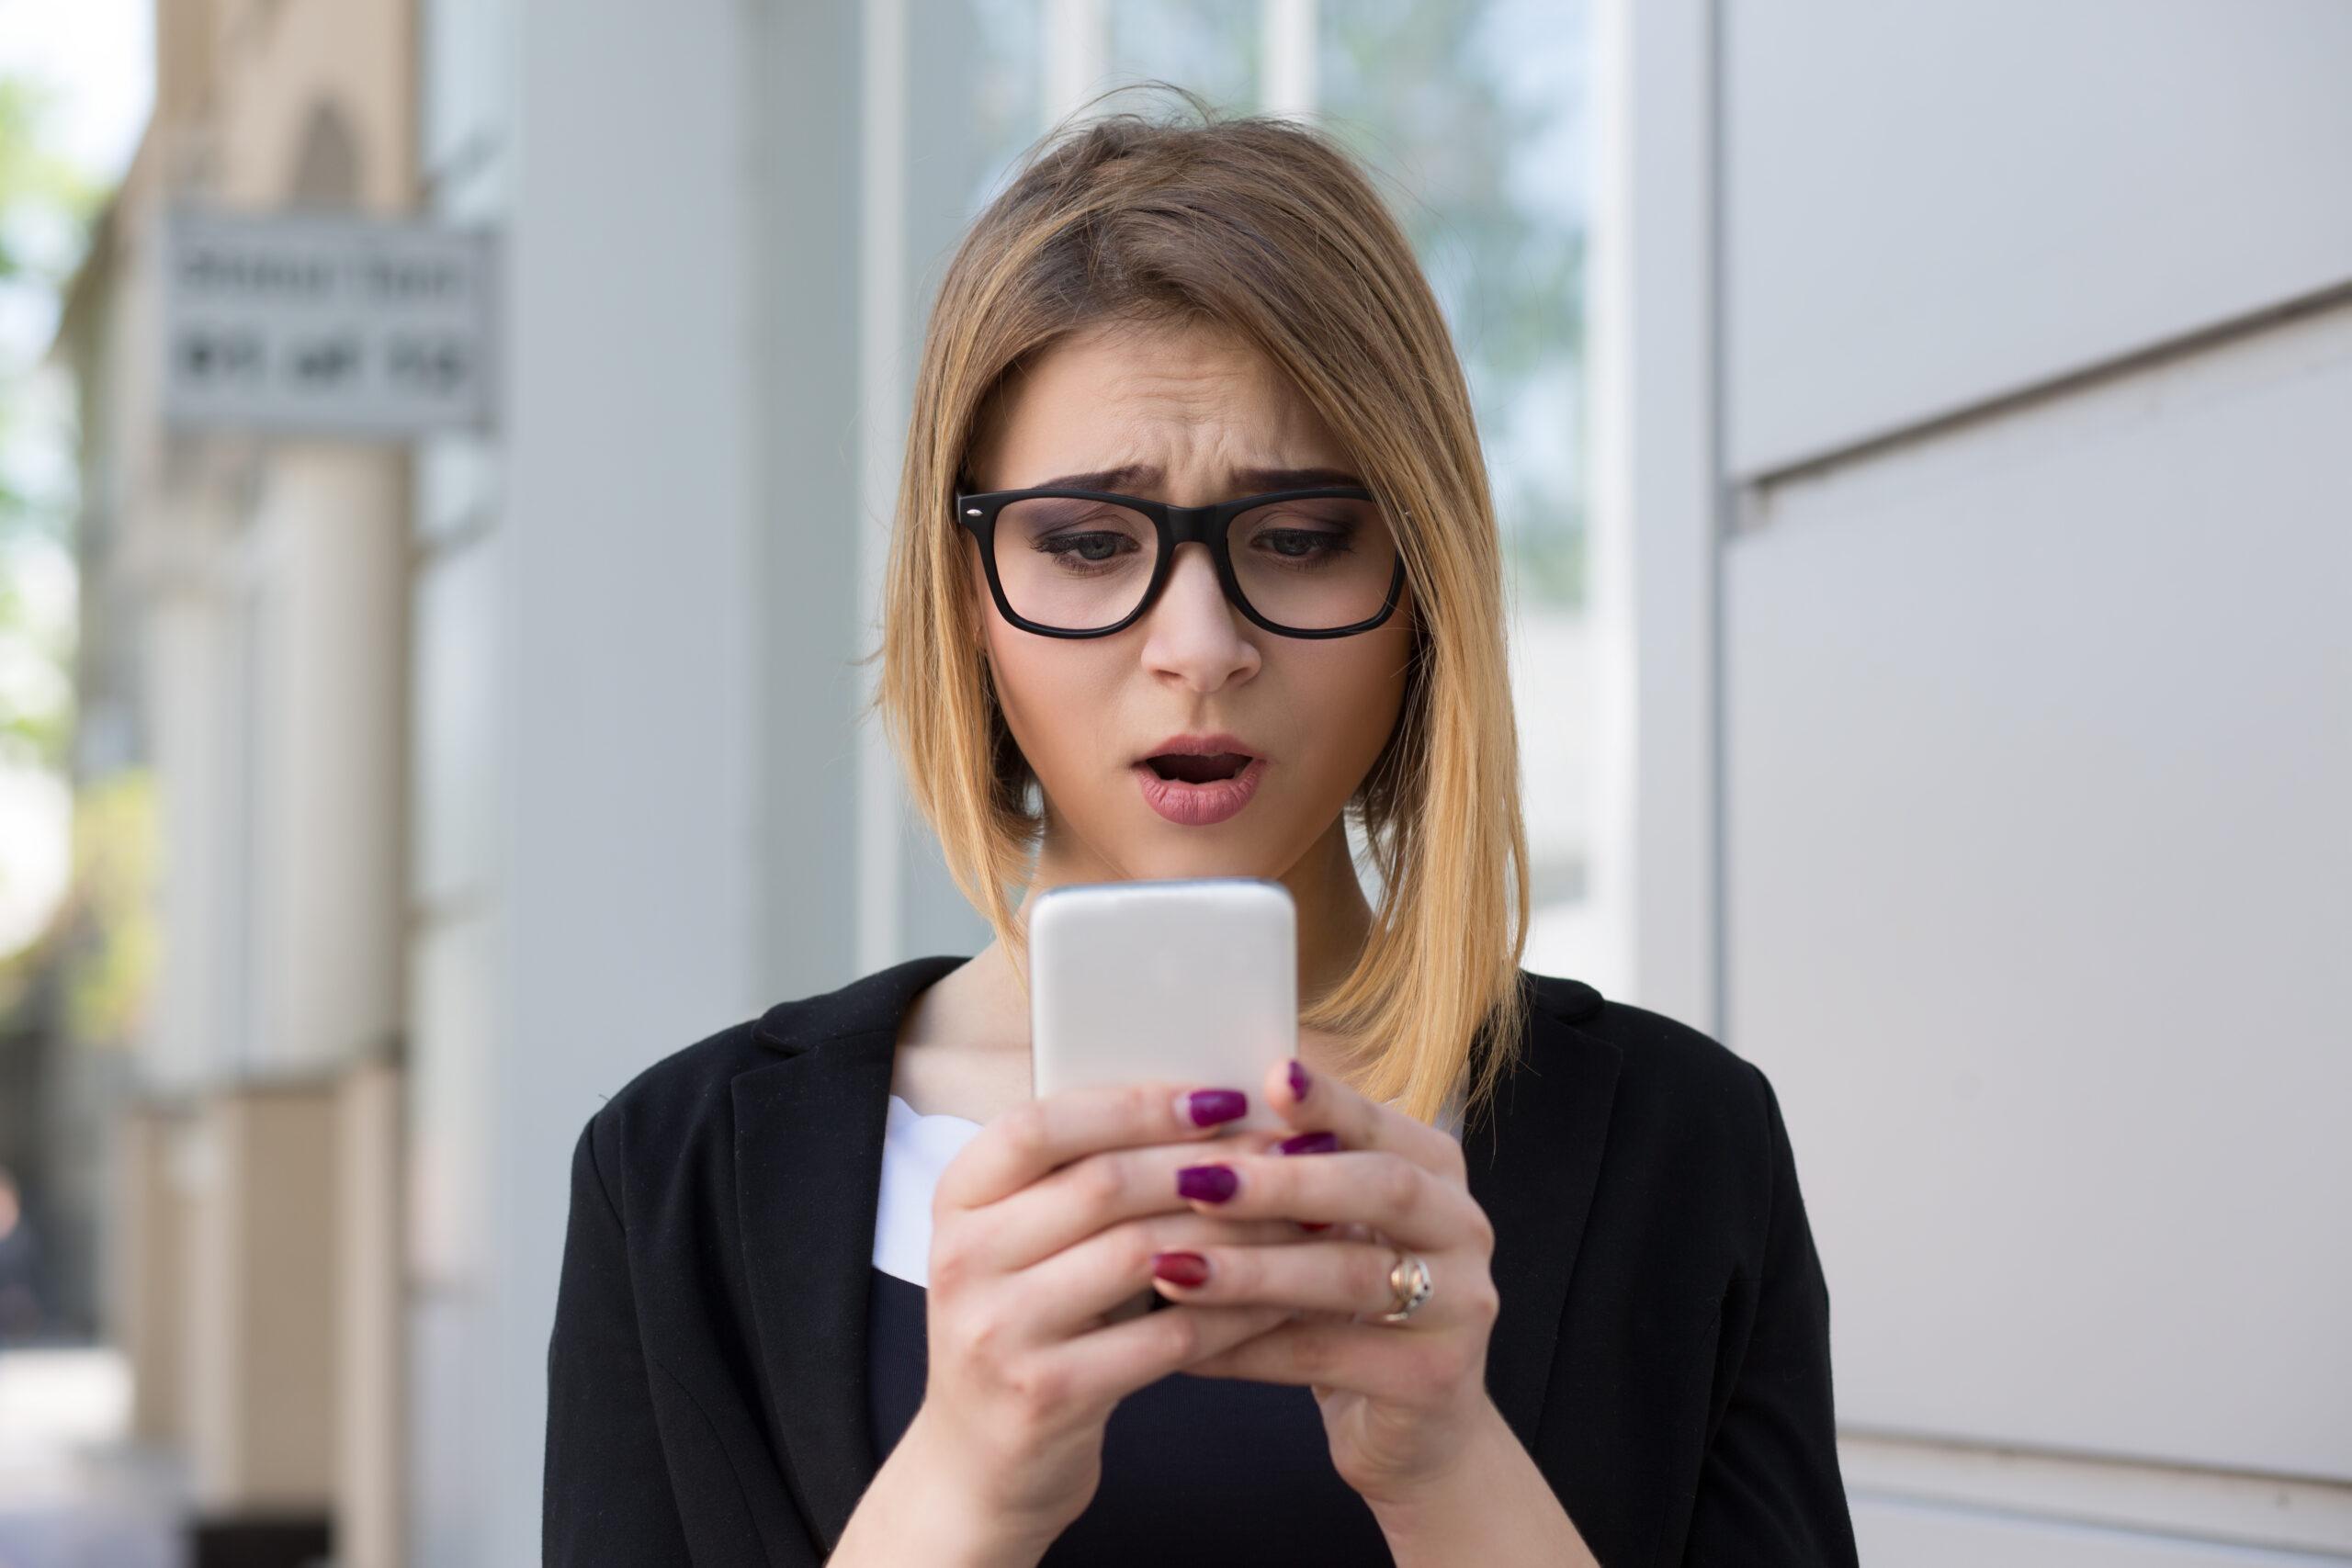 Anxious young girl looking at phone seeing bad news